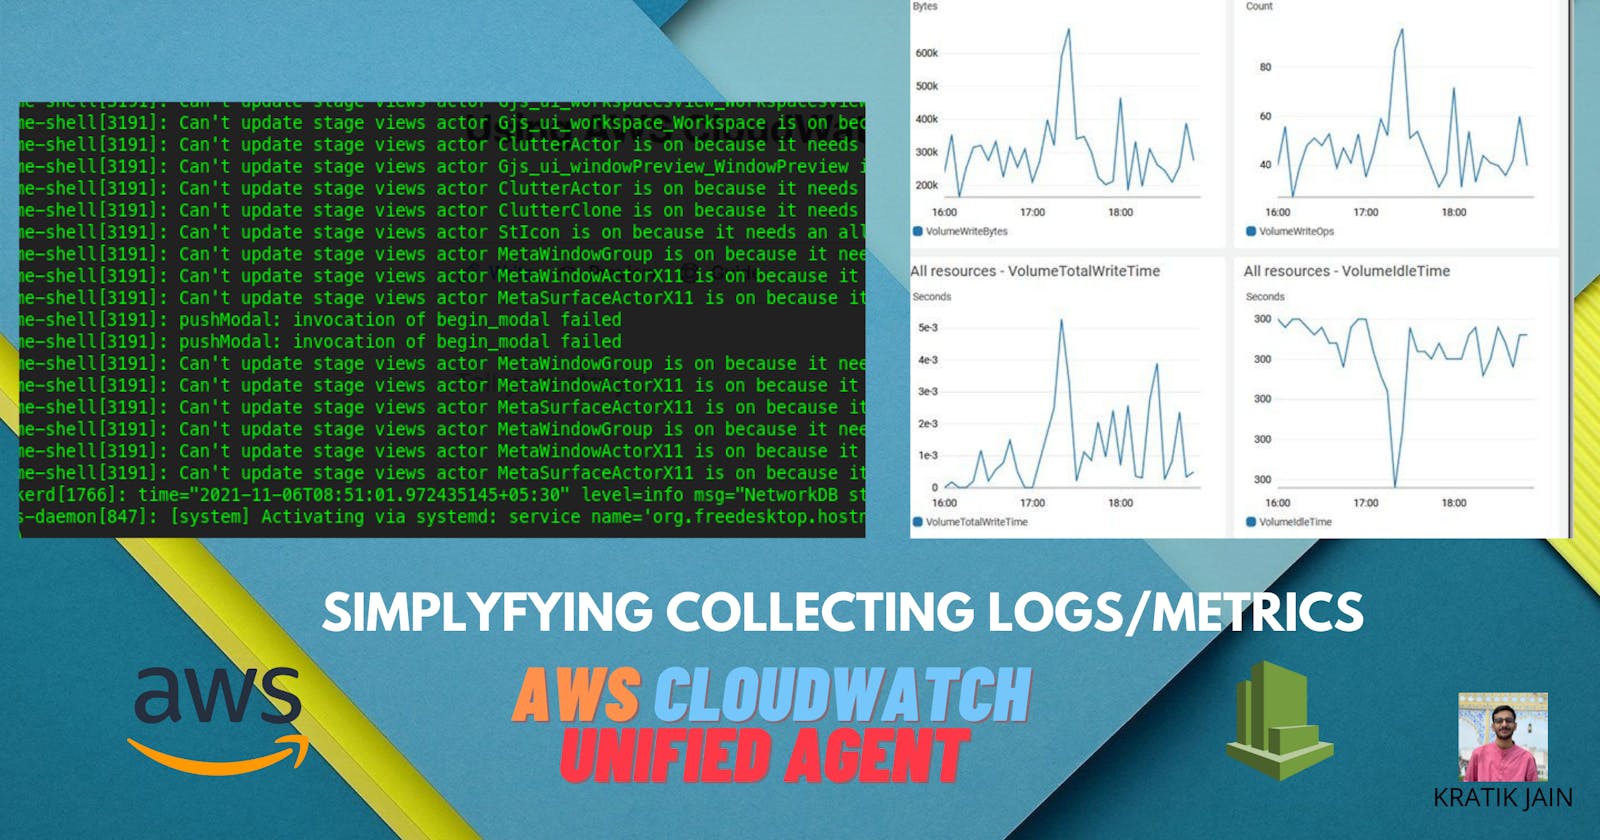 Best Solution for Collecting Logs/Metrics for AWS EC2